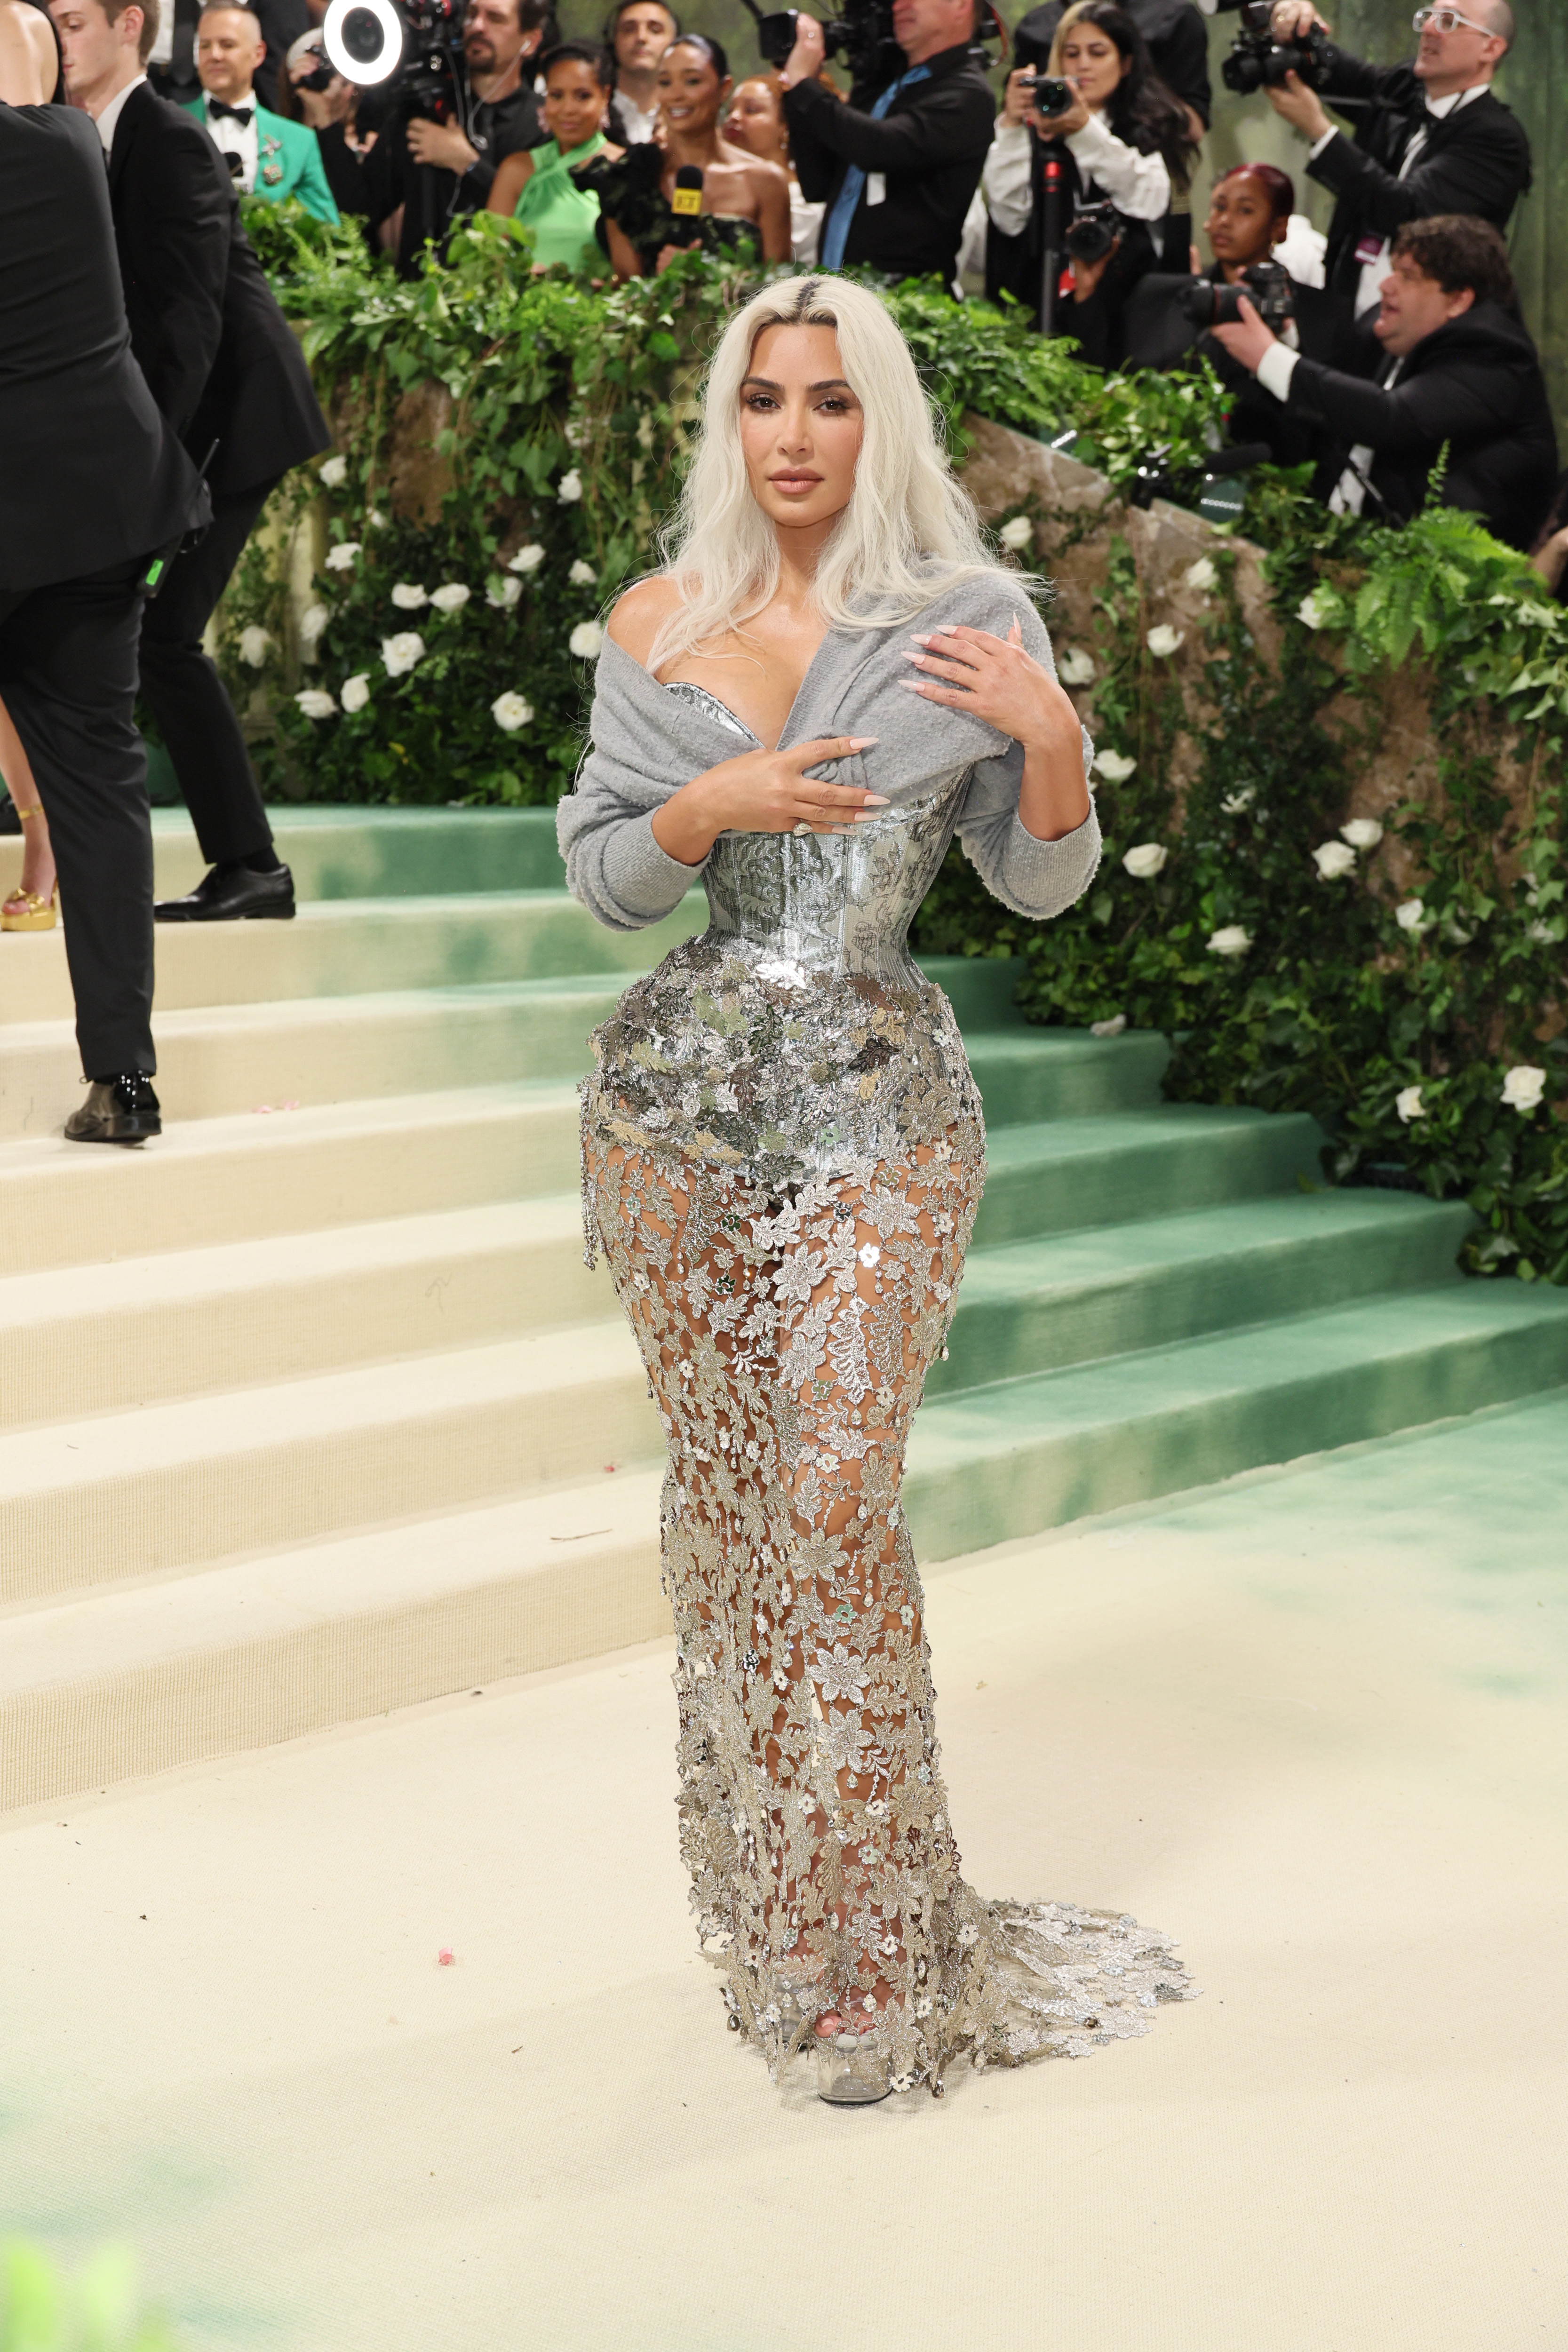 However, a few fans noticed some marks on her stomach and wondered if they were from the super tight corset Kim wore on Monday night at the Met Gala